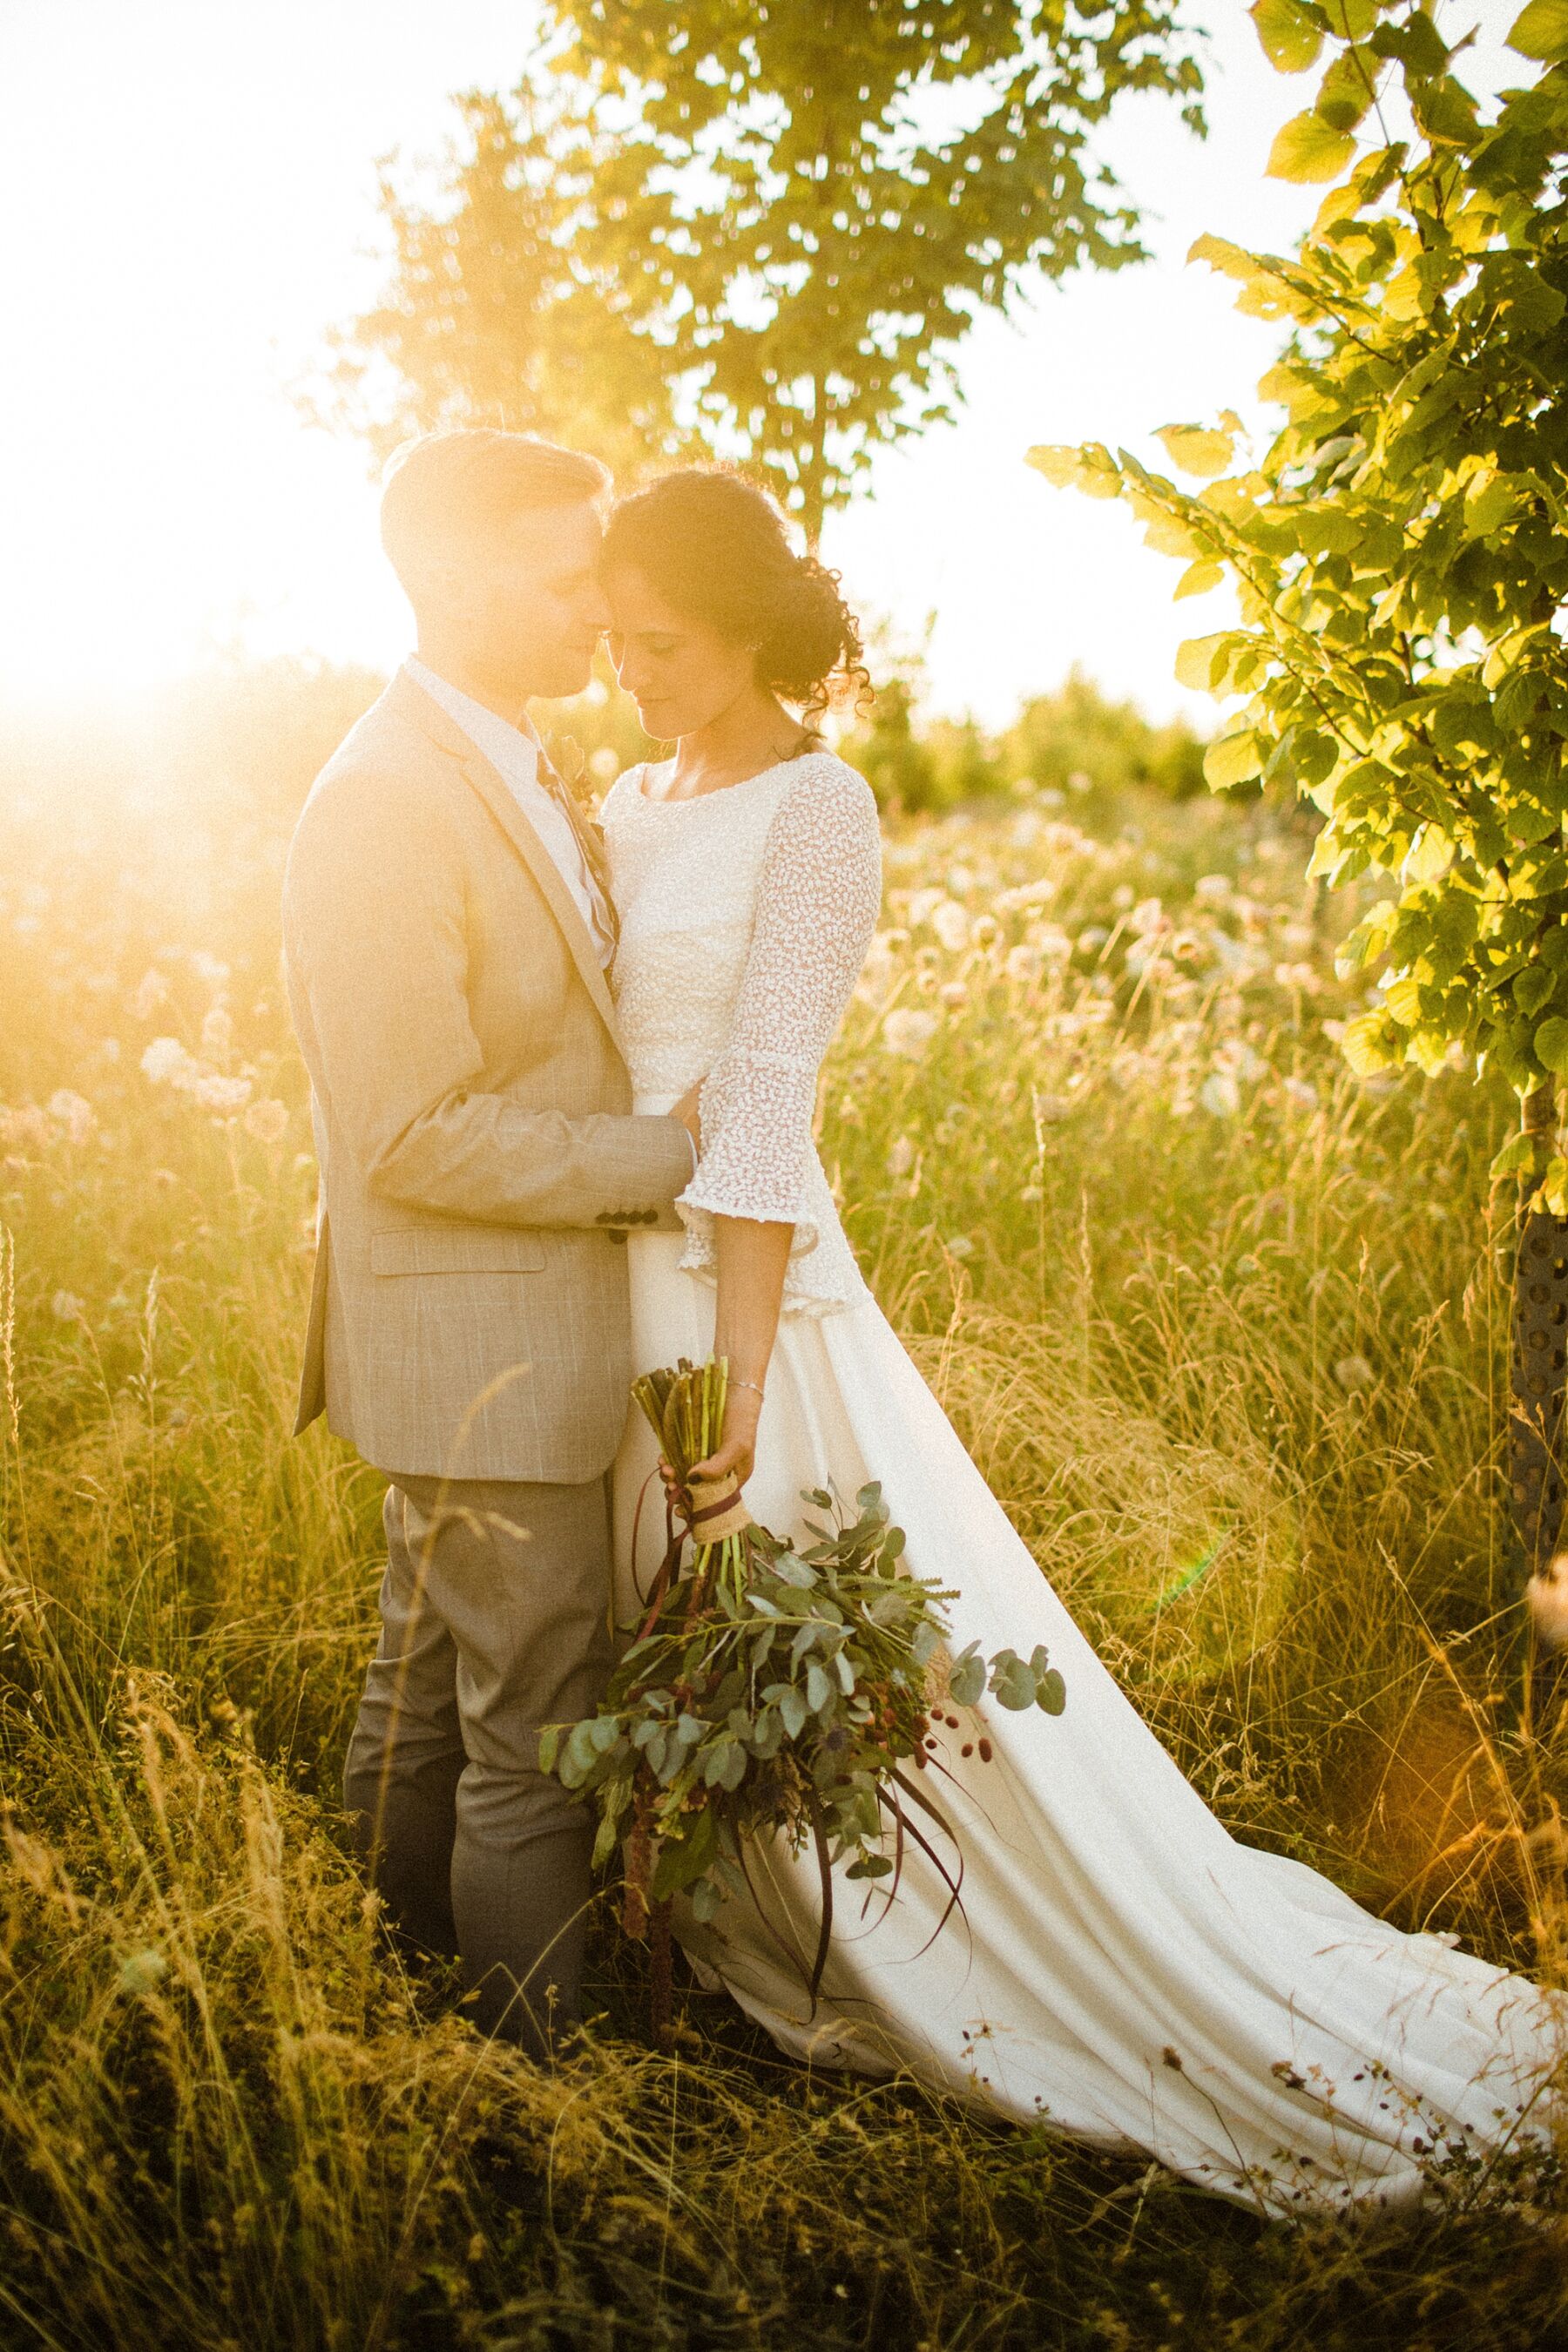 Golden hour shot of bride and groom hugging each other in a field, by Claudia Rose Carter Photography